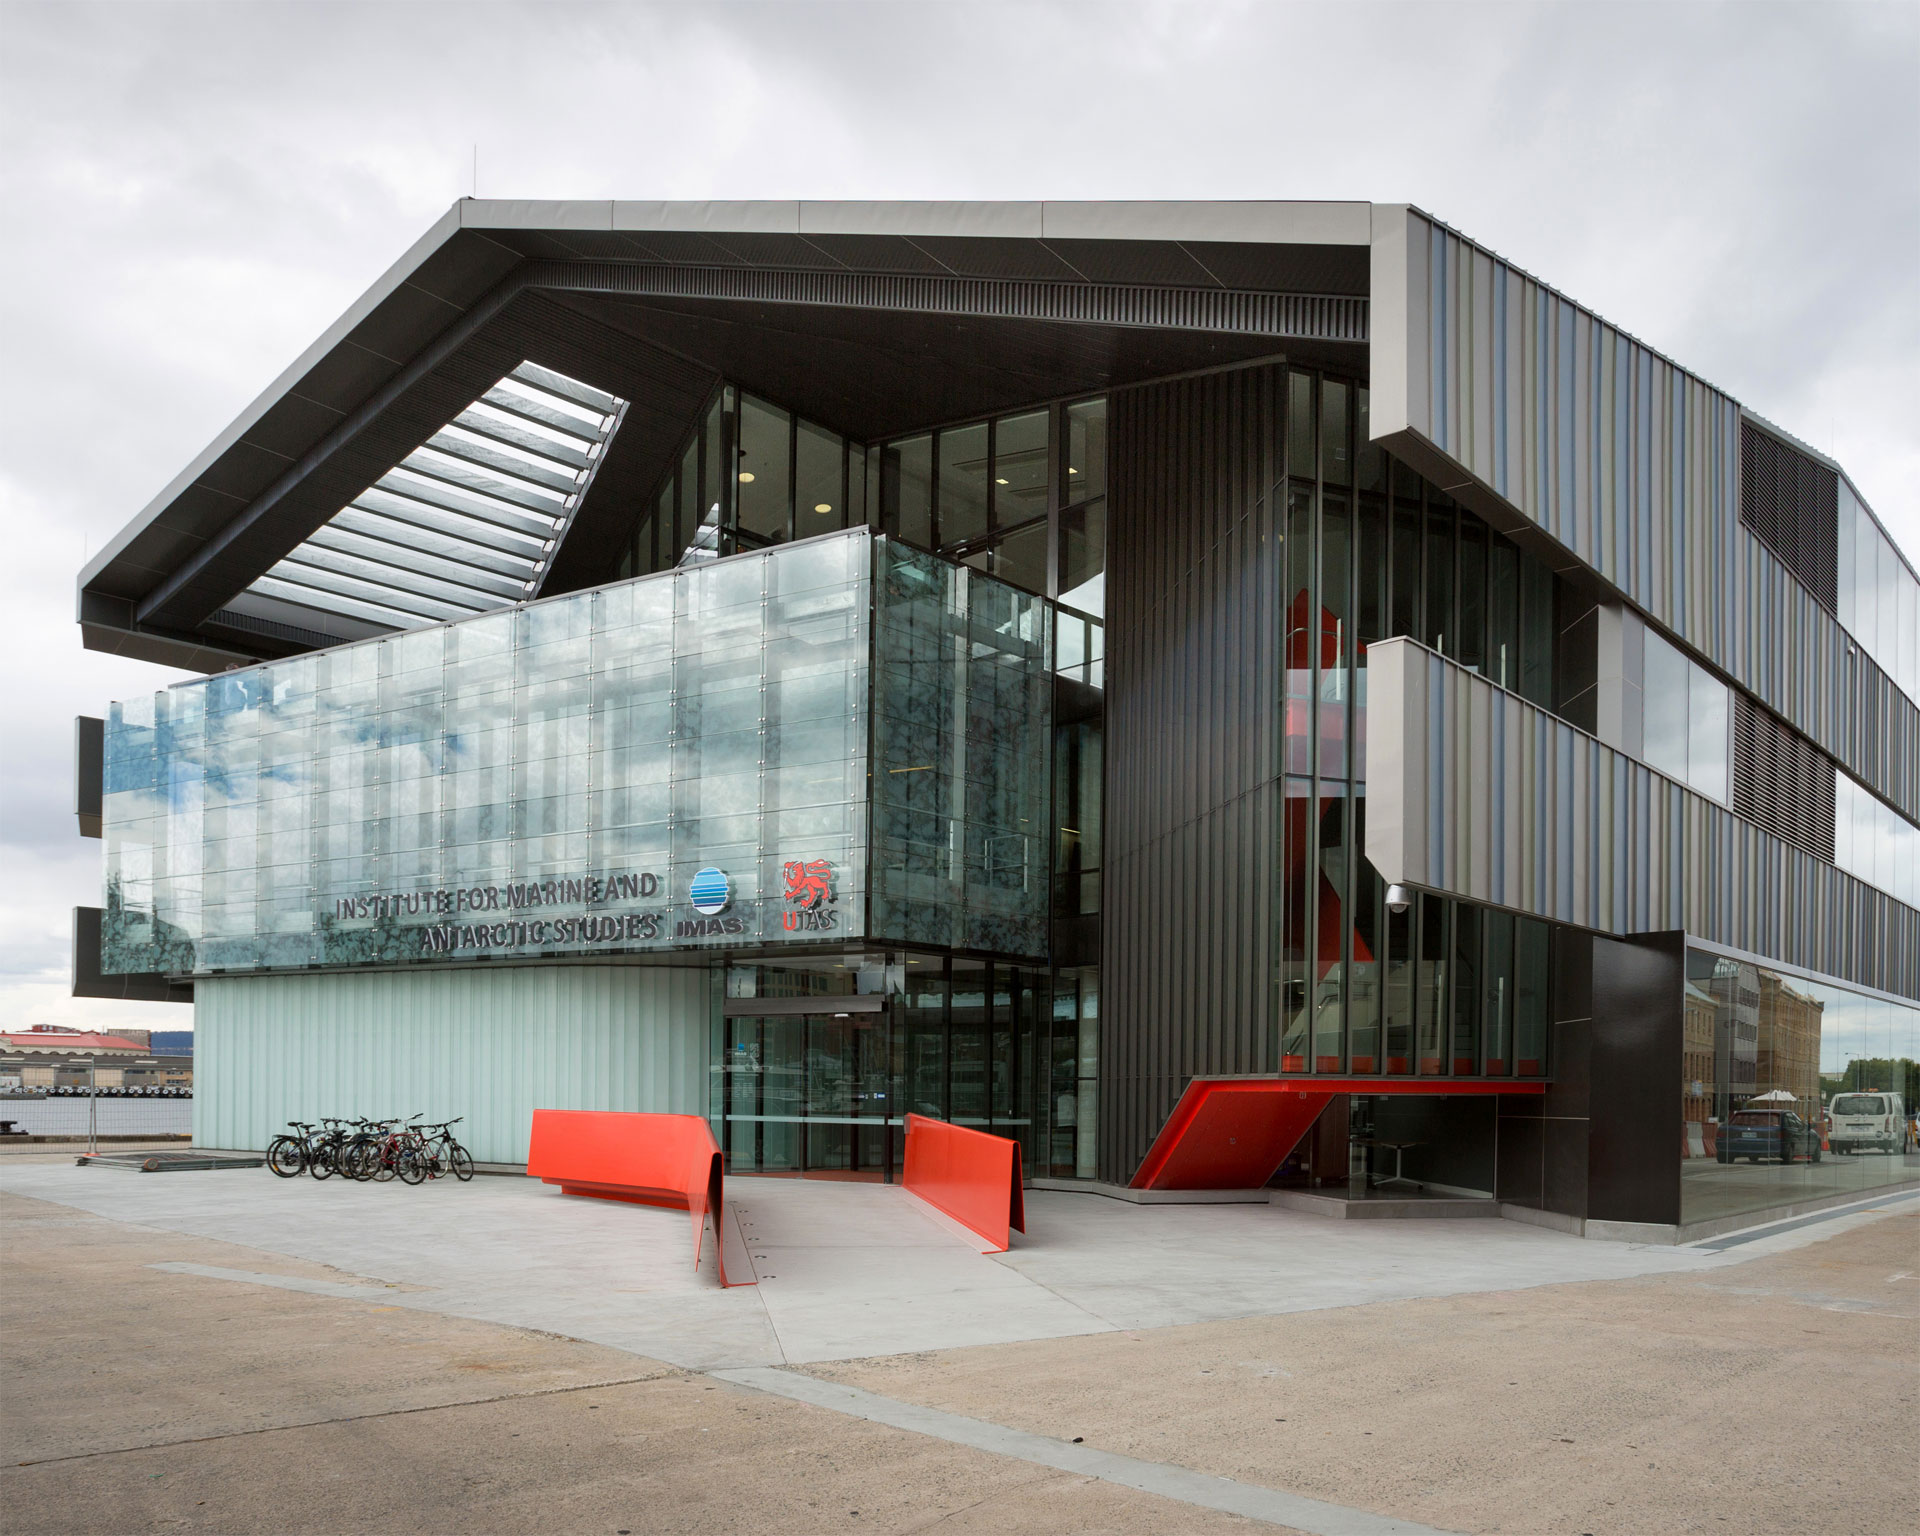 A modern building with glass and metal features, red benches in front, and a row of parked bicycles